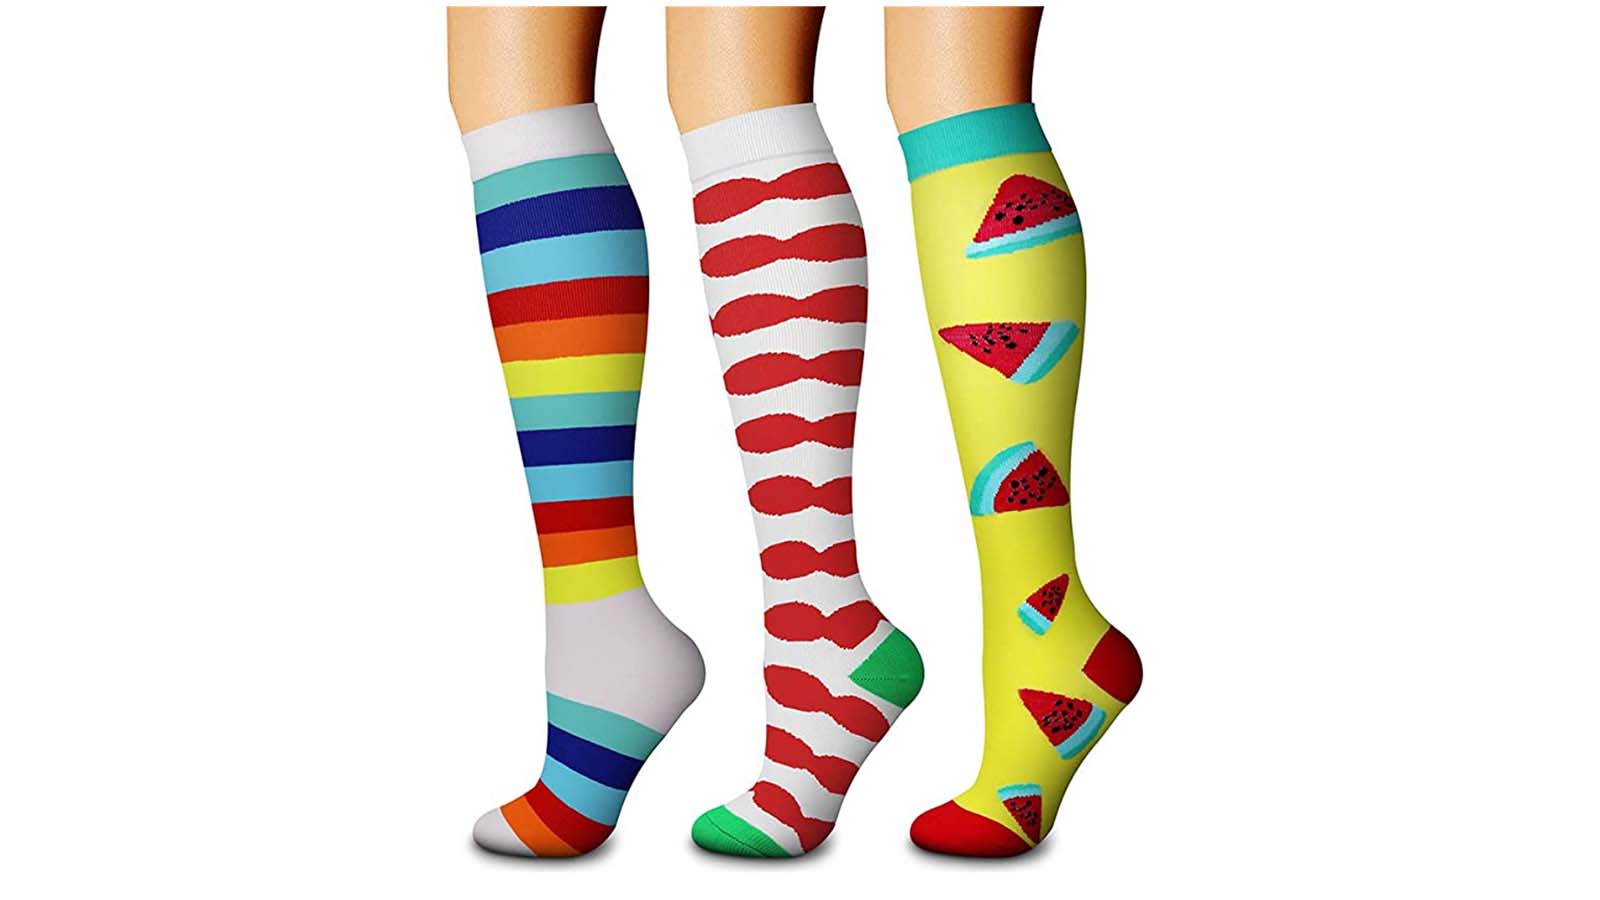 Compression Stockings - Medical Compression Stocking Latest Price,  Manufacturers & Suppliers